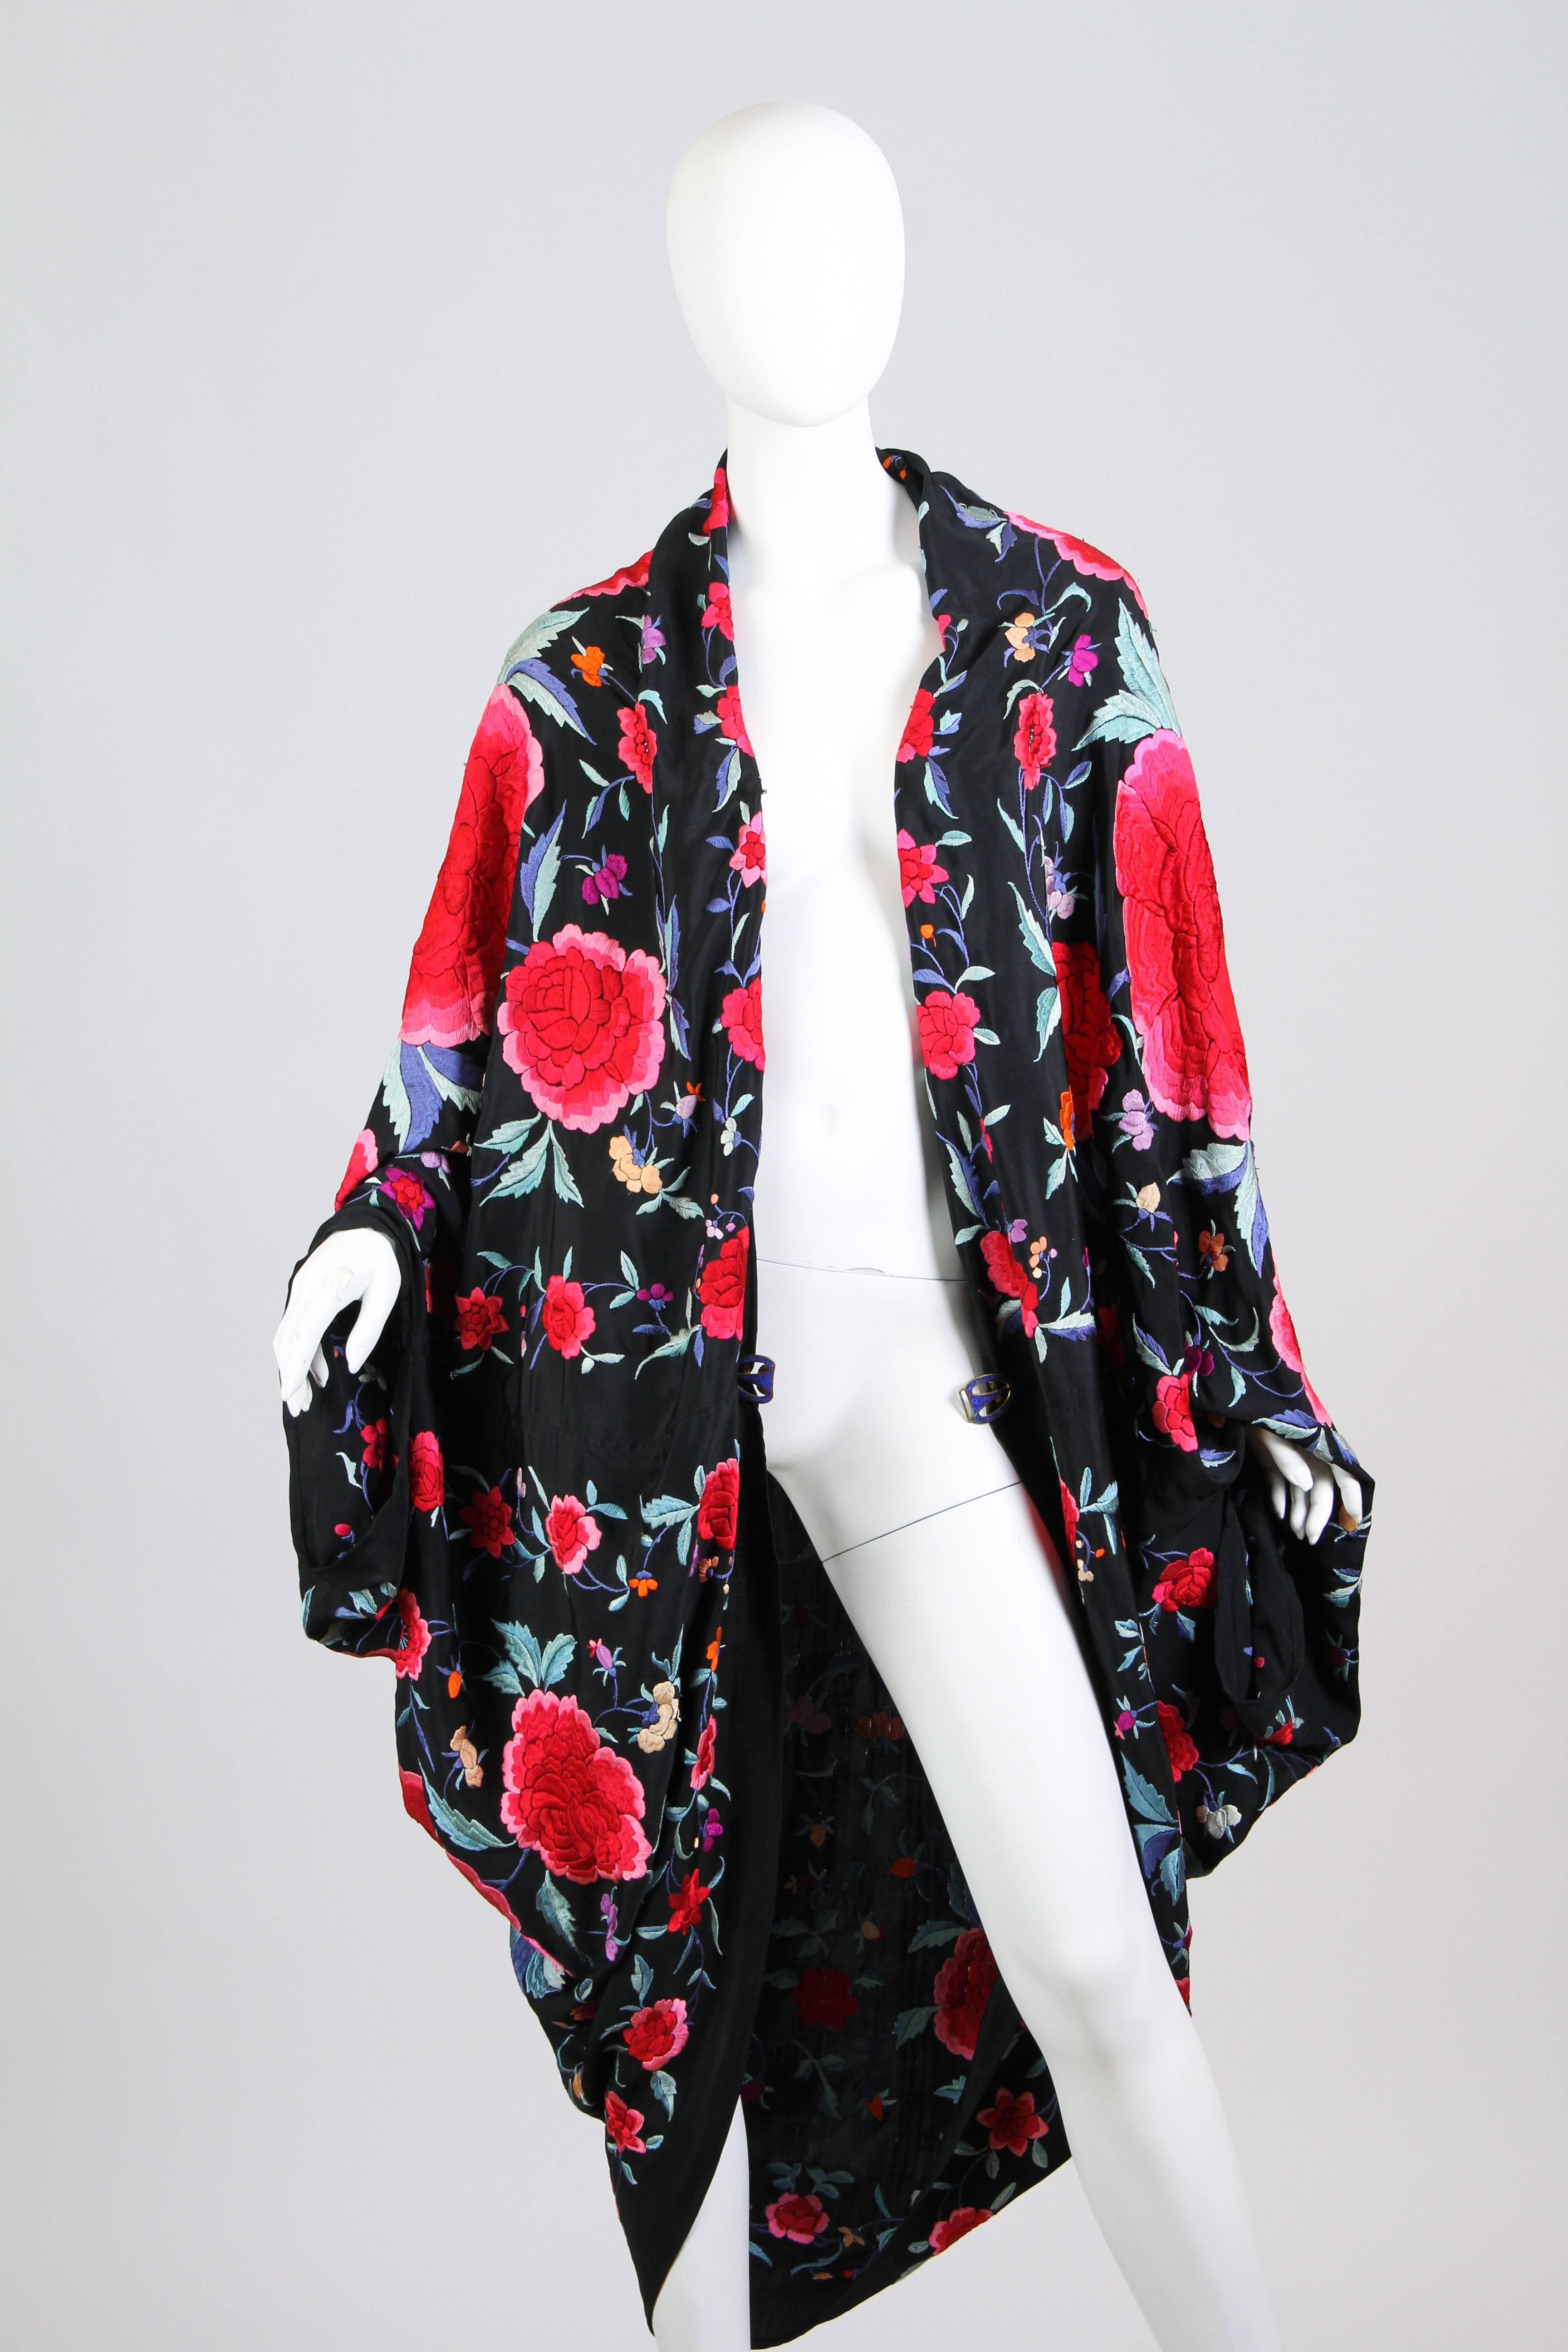 This is an absolutely incredible coccoon coat. The original shawl likely dates from the late 1910s or early 1920s. Made of a black silk ground with incredible polychrome silk embroidery worked by hand. The skillful craftsmanship and beauty of real